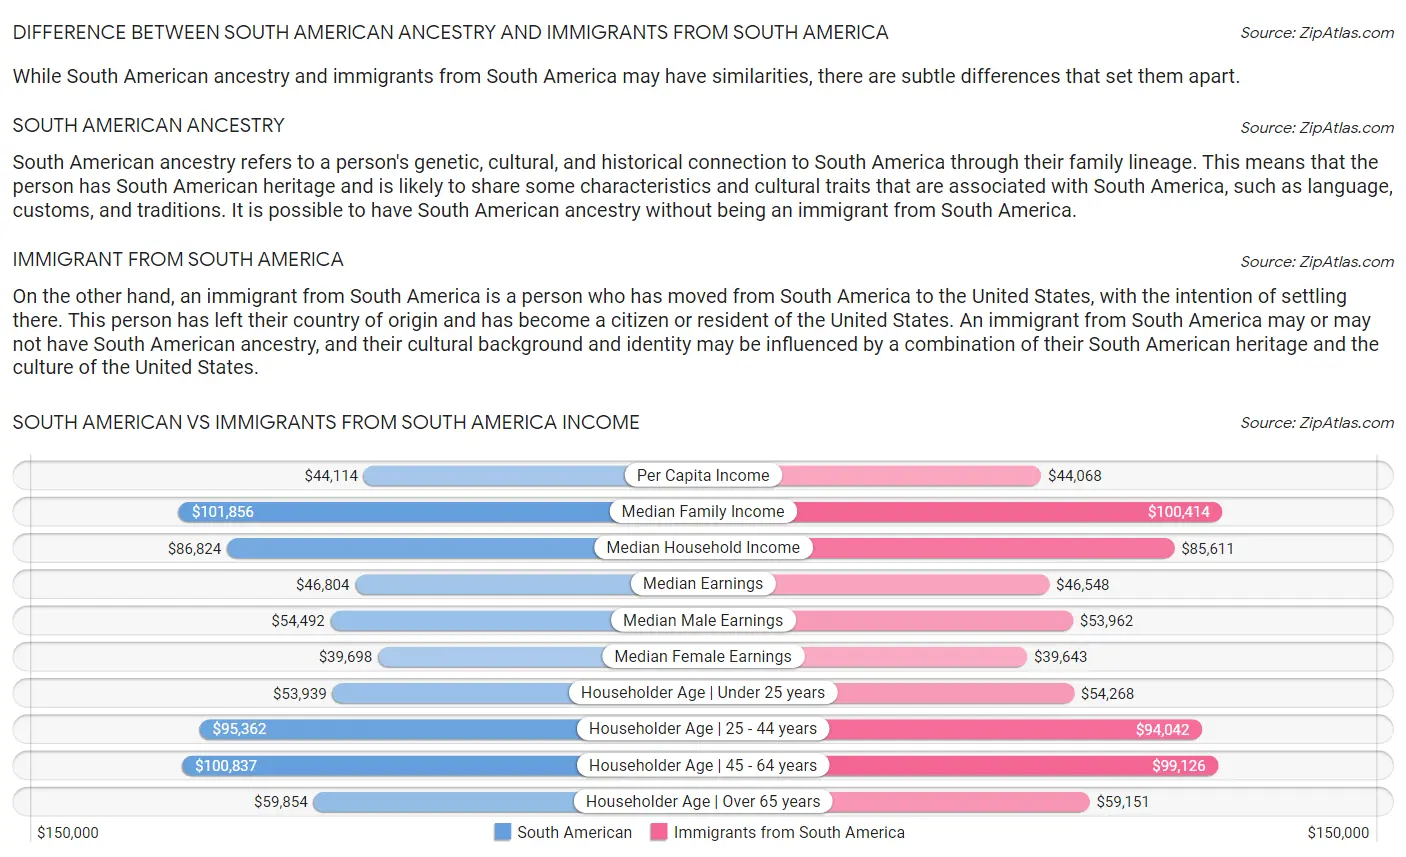 South American vs Immigrants from South America Income